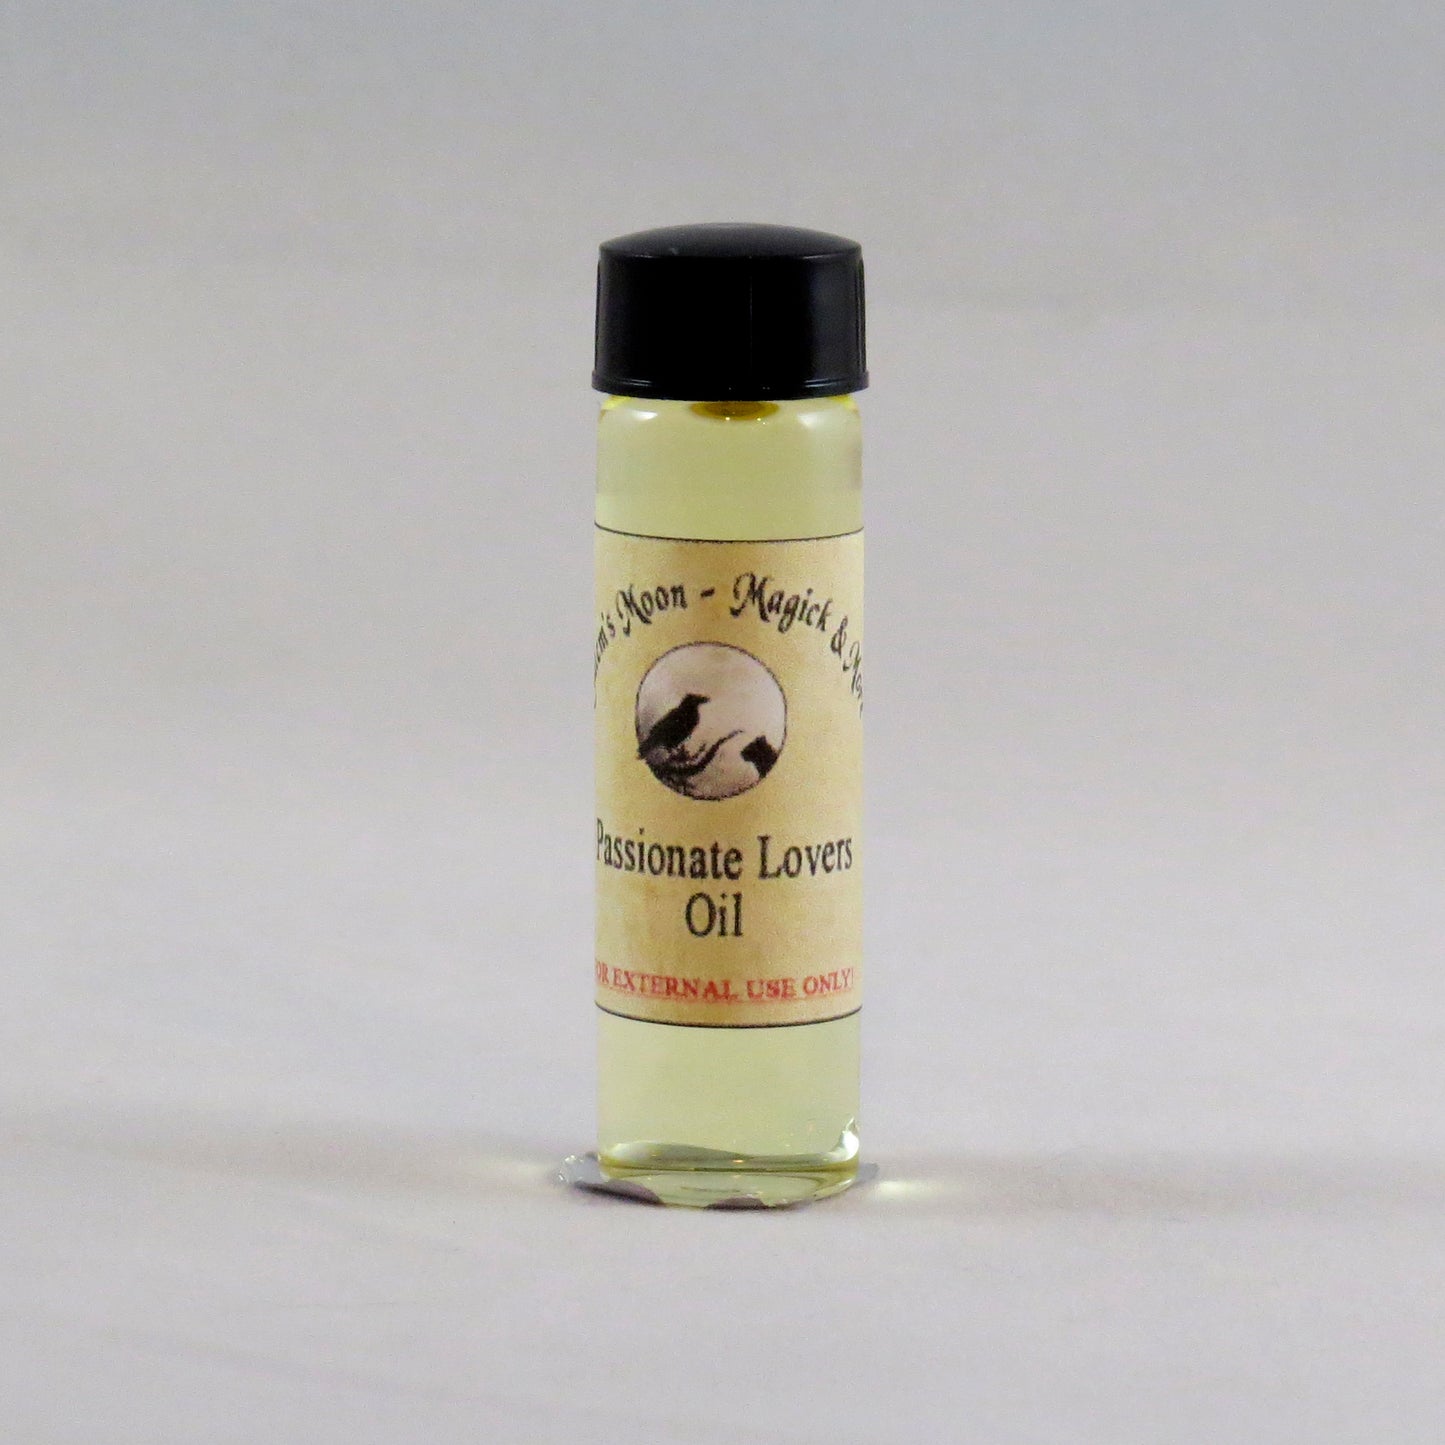 Passionate Lovers Oil